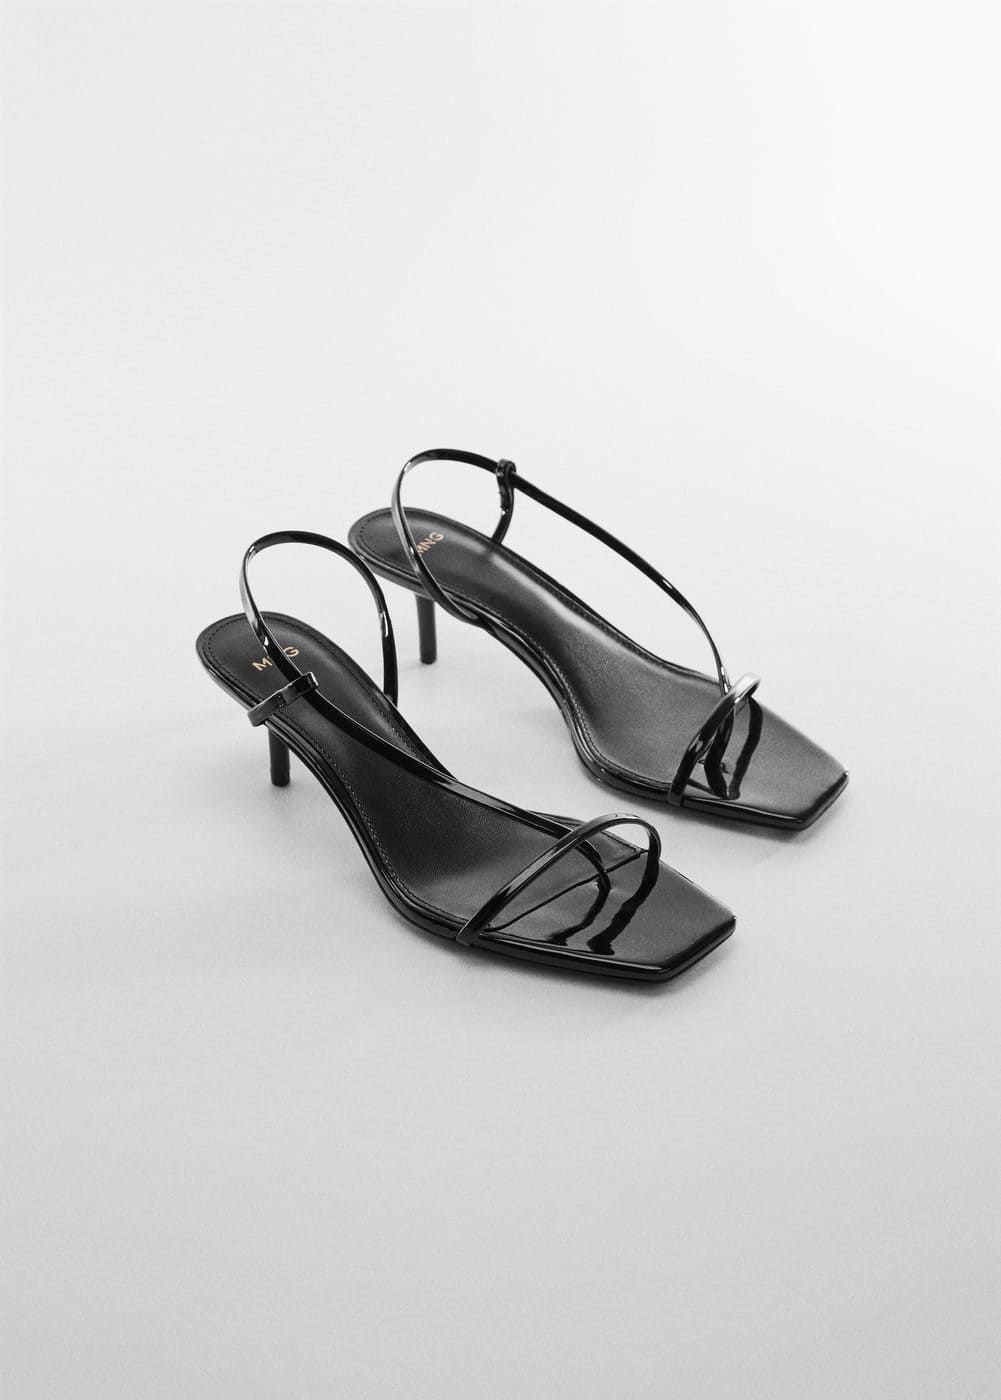 Topshop Faith strappy two part heeled sandals in black satin | ASOS